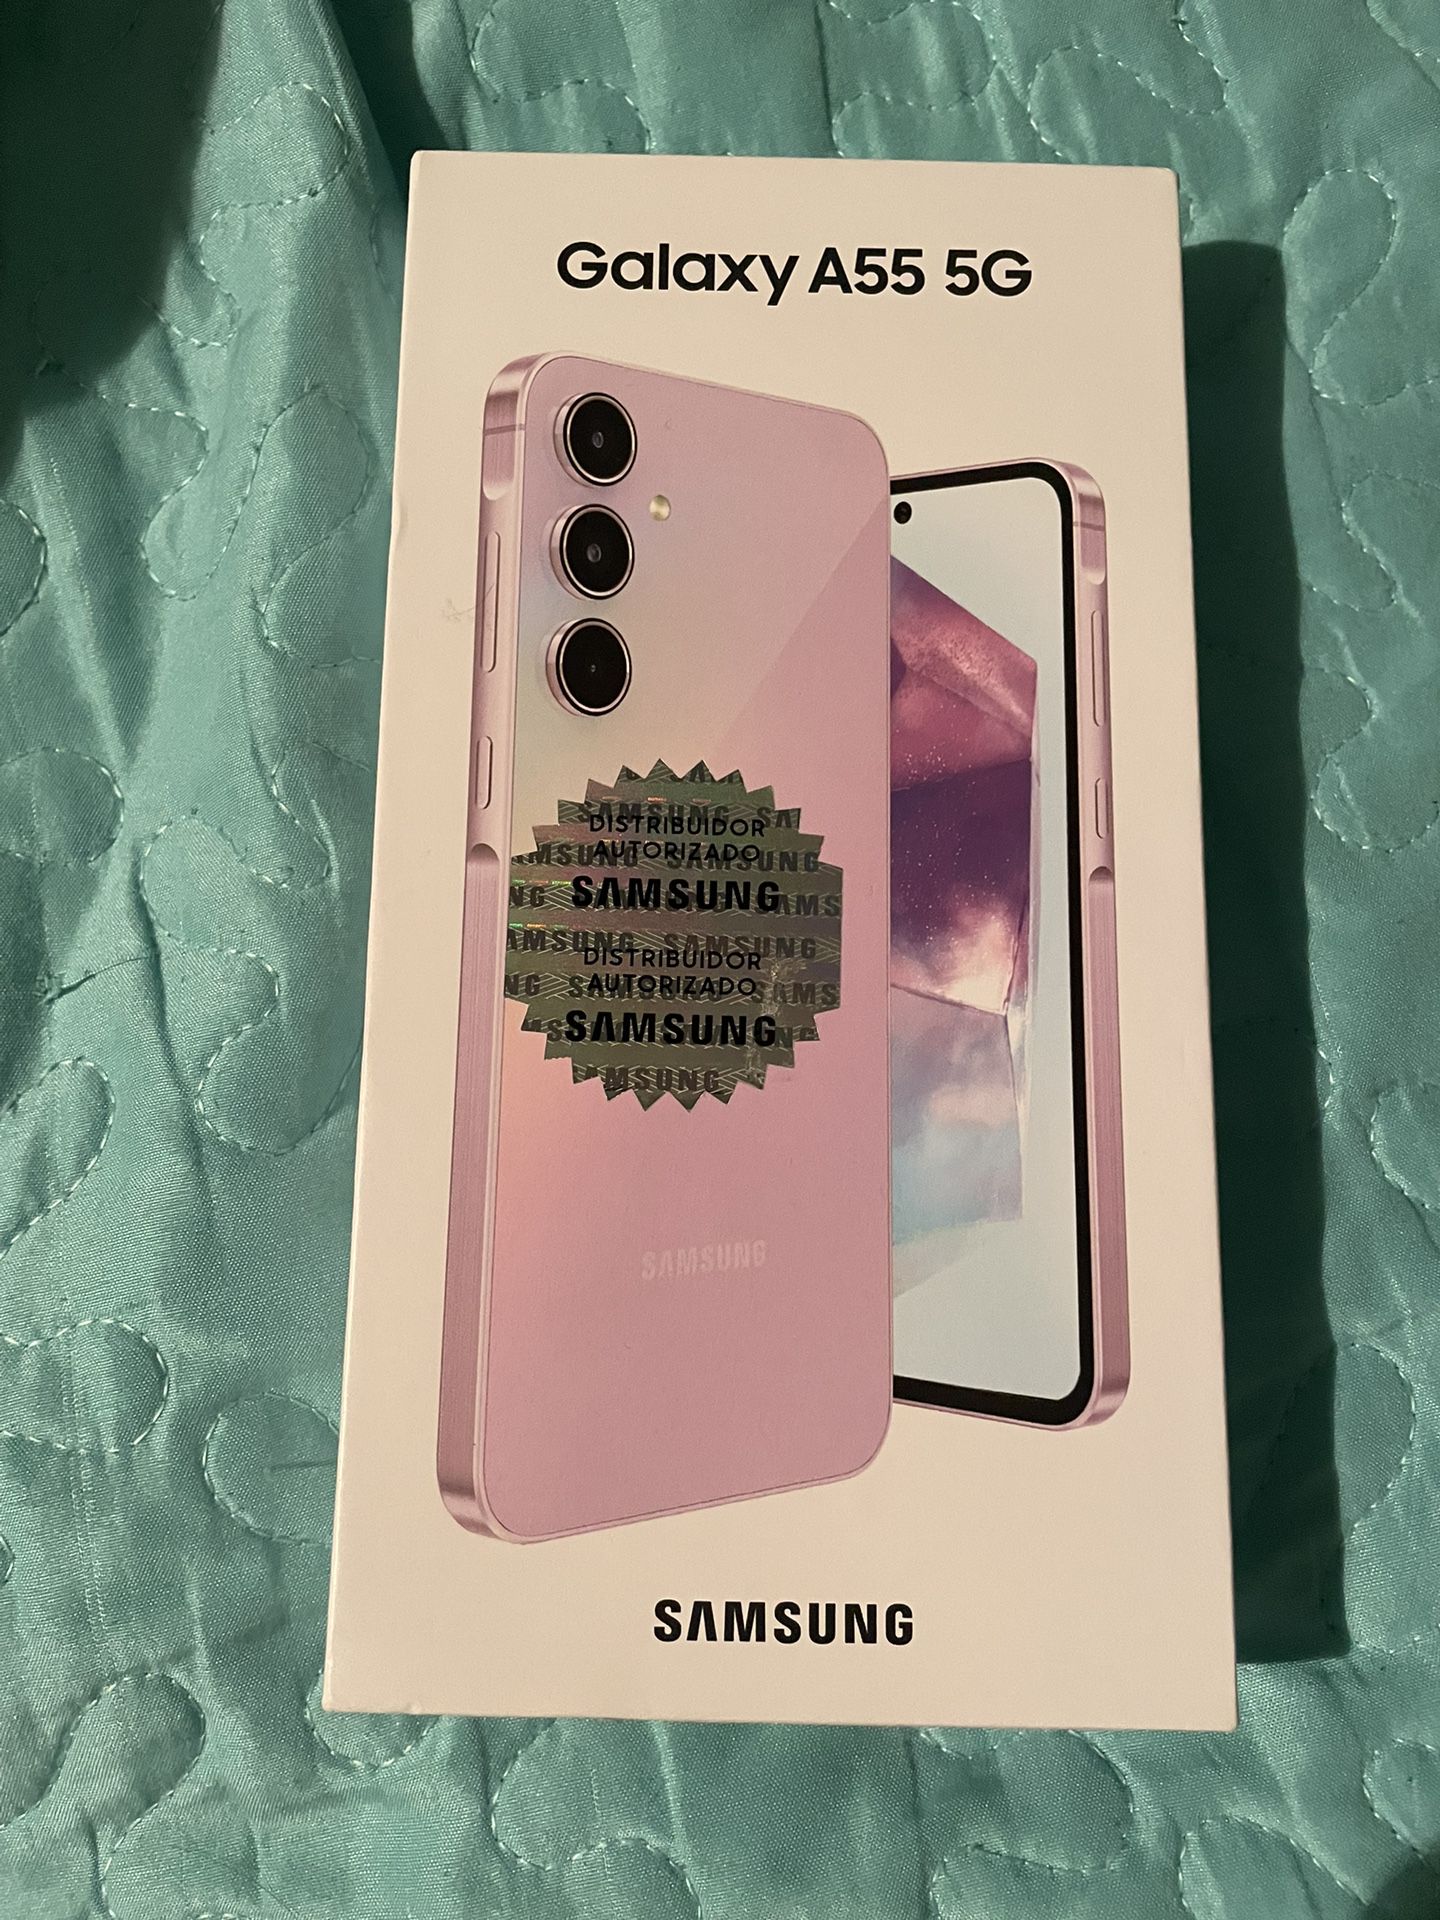 Samsung Galaxy A55 5G Cell Phones Blue And Lilac both Unlocked